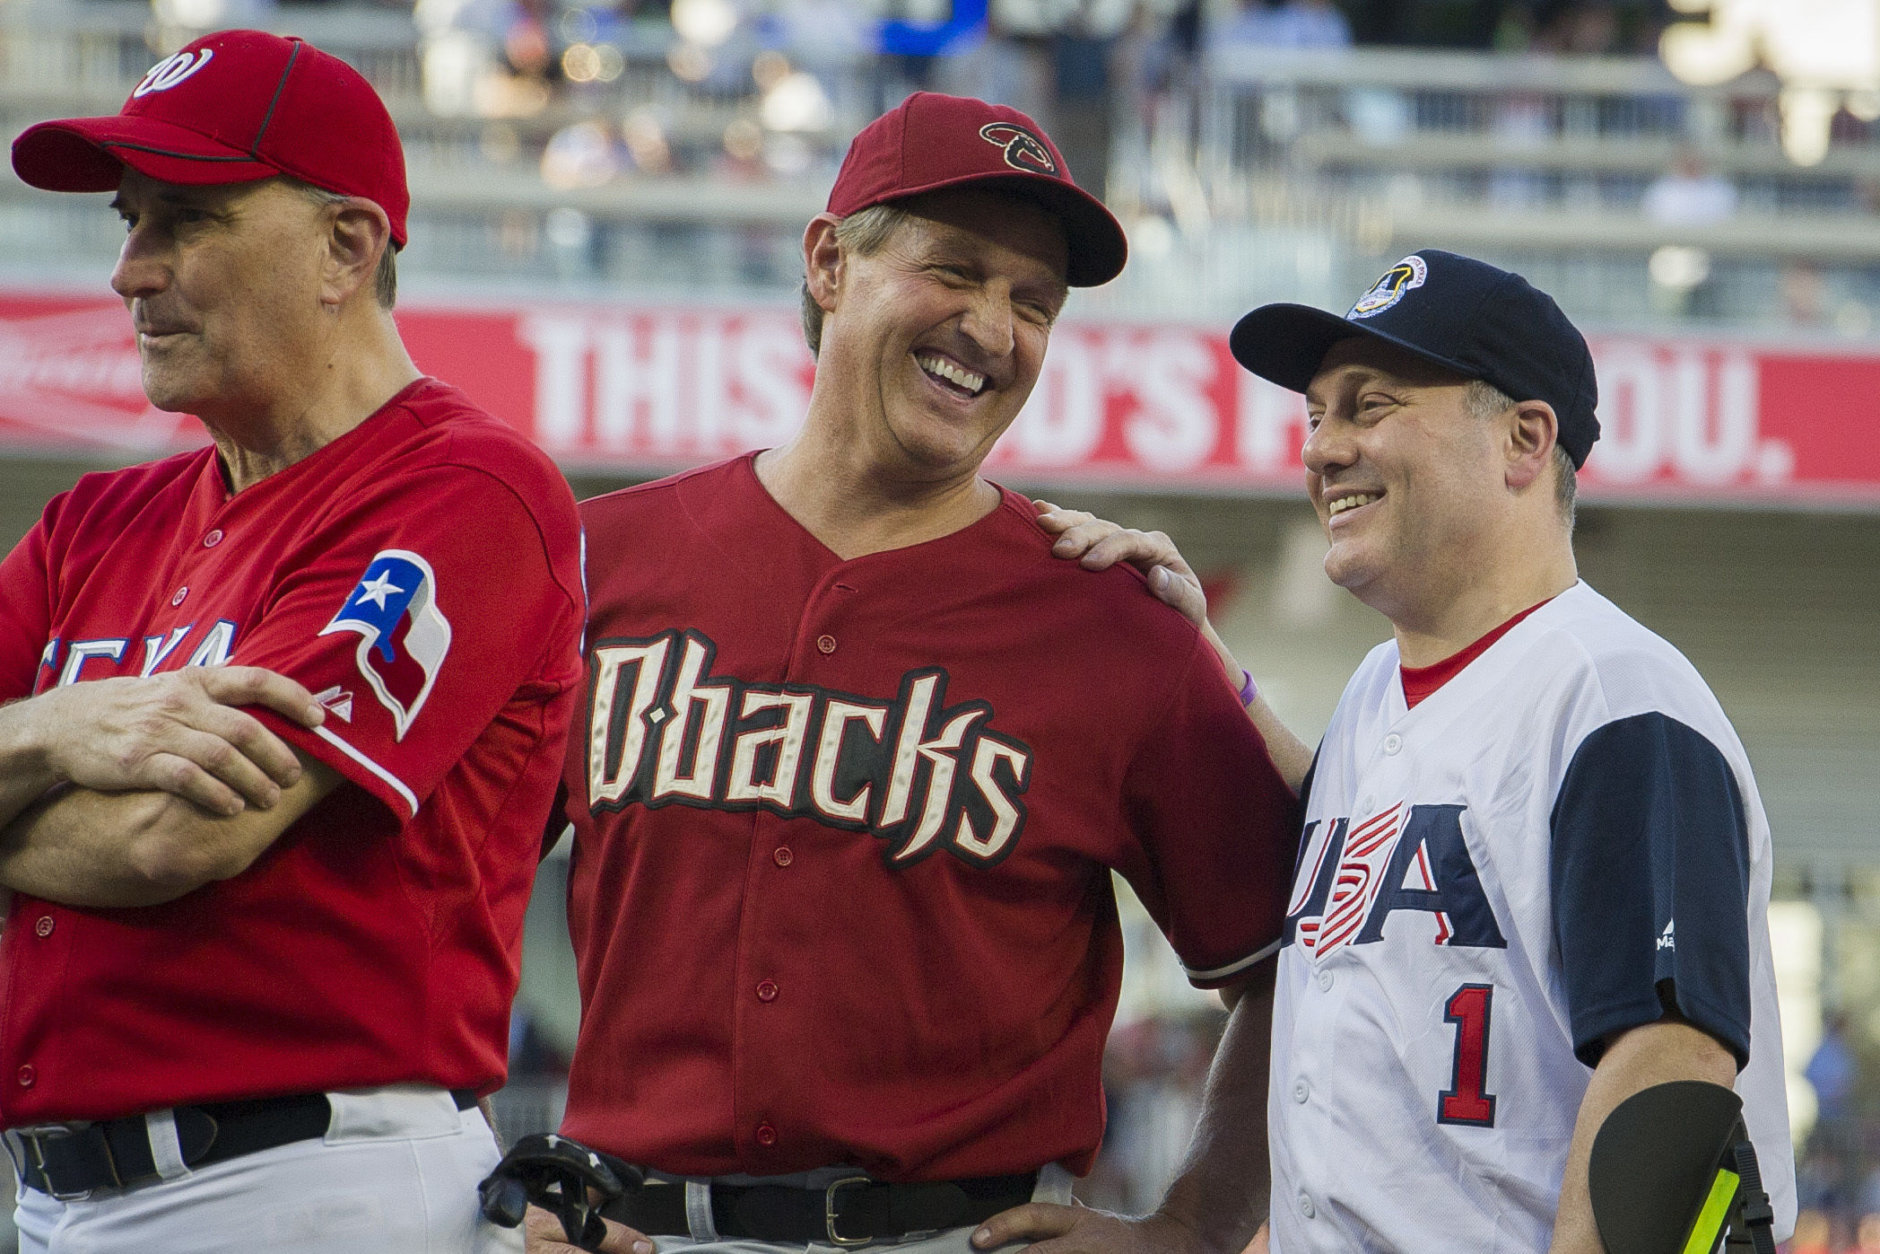 Rep. Jeff Flake, R-Ariz., center, talks with Rep. Steve Scalise, R- La., at the start of the 57th Congressional Baseball Game at National's Park in Washington, Thursday, June 14, 2018. Scalise, the House majority whip who was shot at a Republican baseball practice a year ago, fielded a ground ball and threw out the first batter of the annual congressional baseball game Thursday. (AP Photo/Cliff Owen)